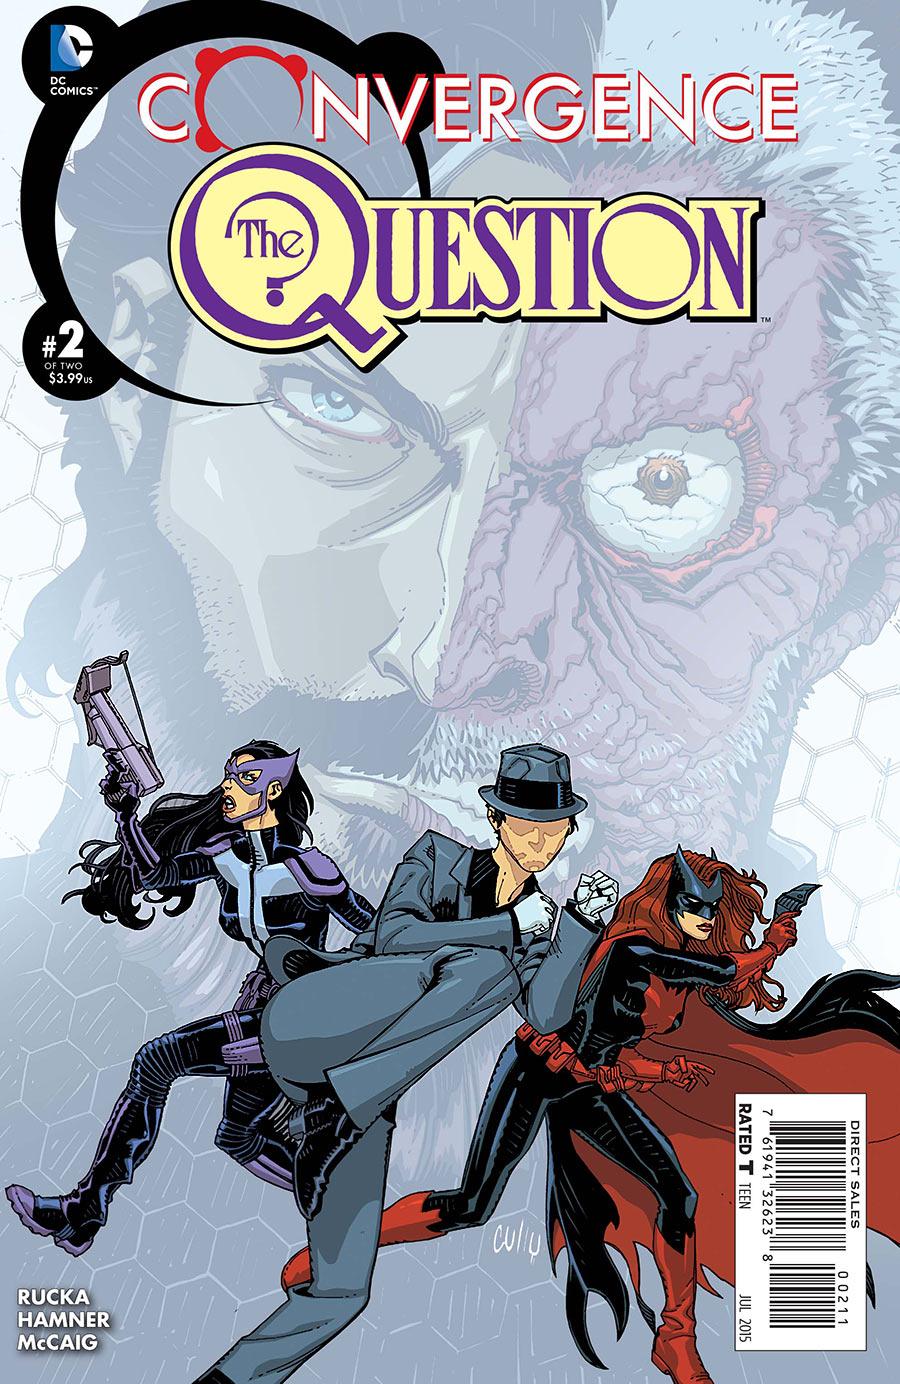 Convergence: The Question Vol. 1 #2